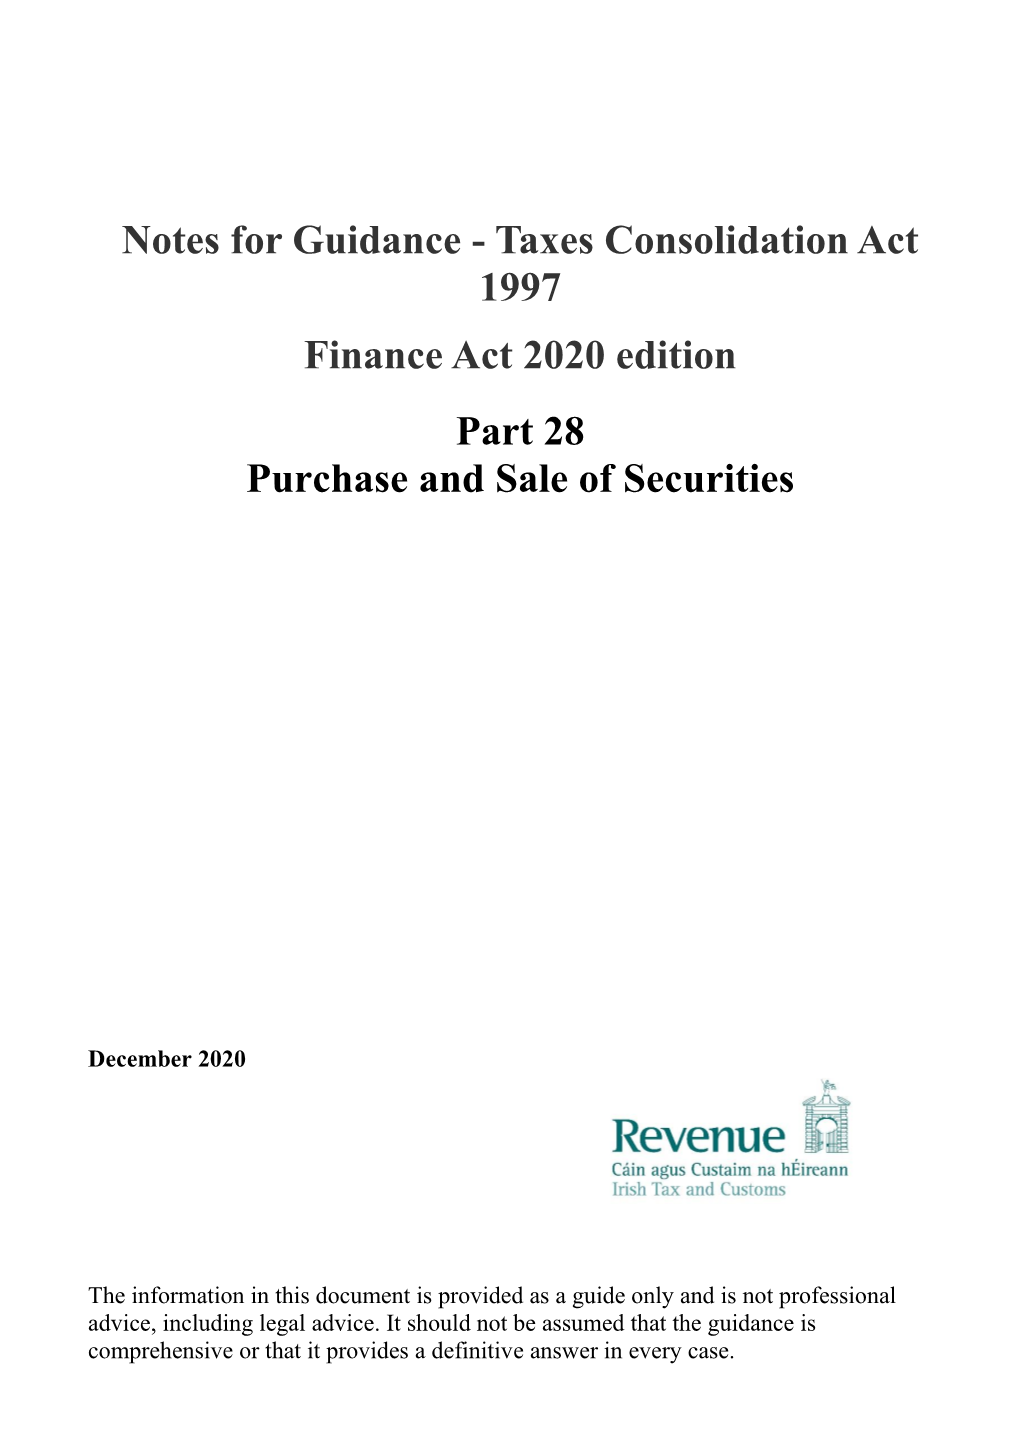 Part 28 Purchase and Sale of Securities